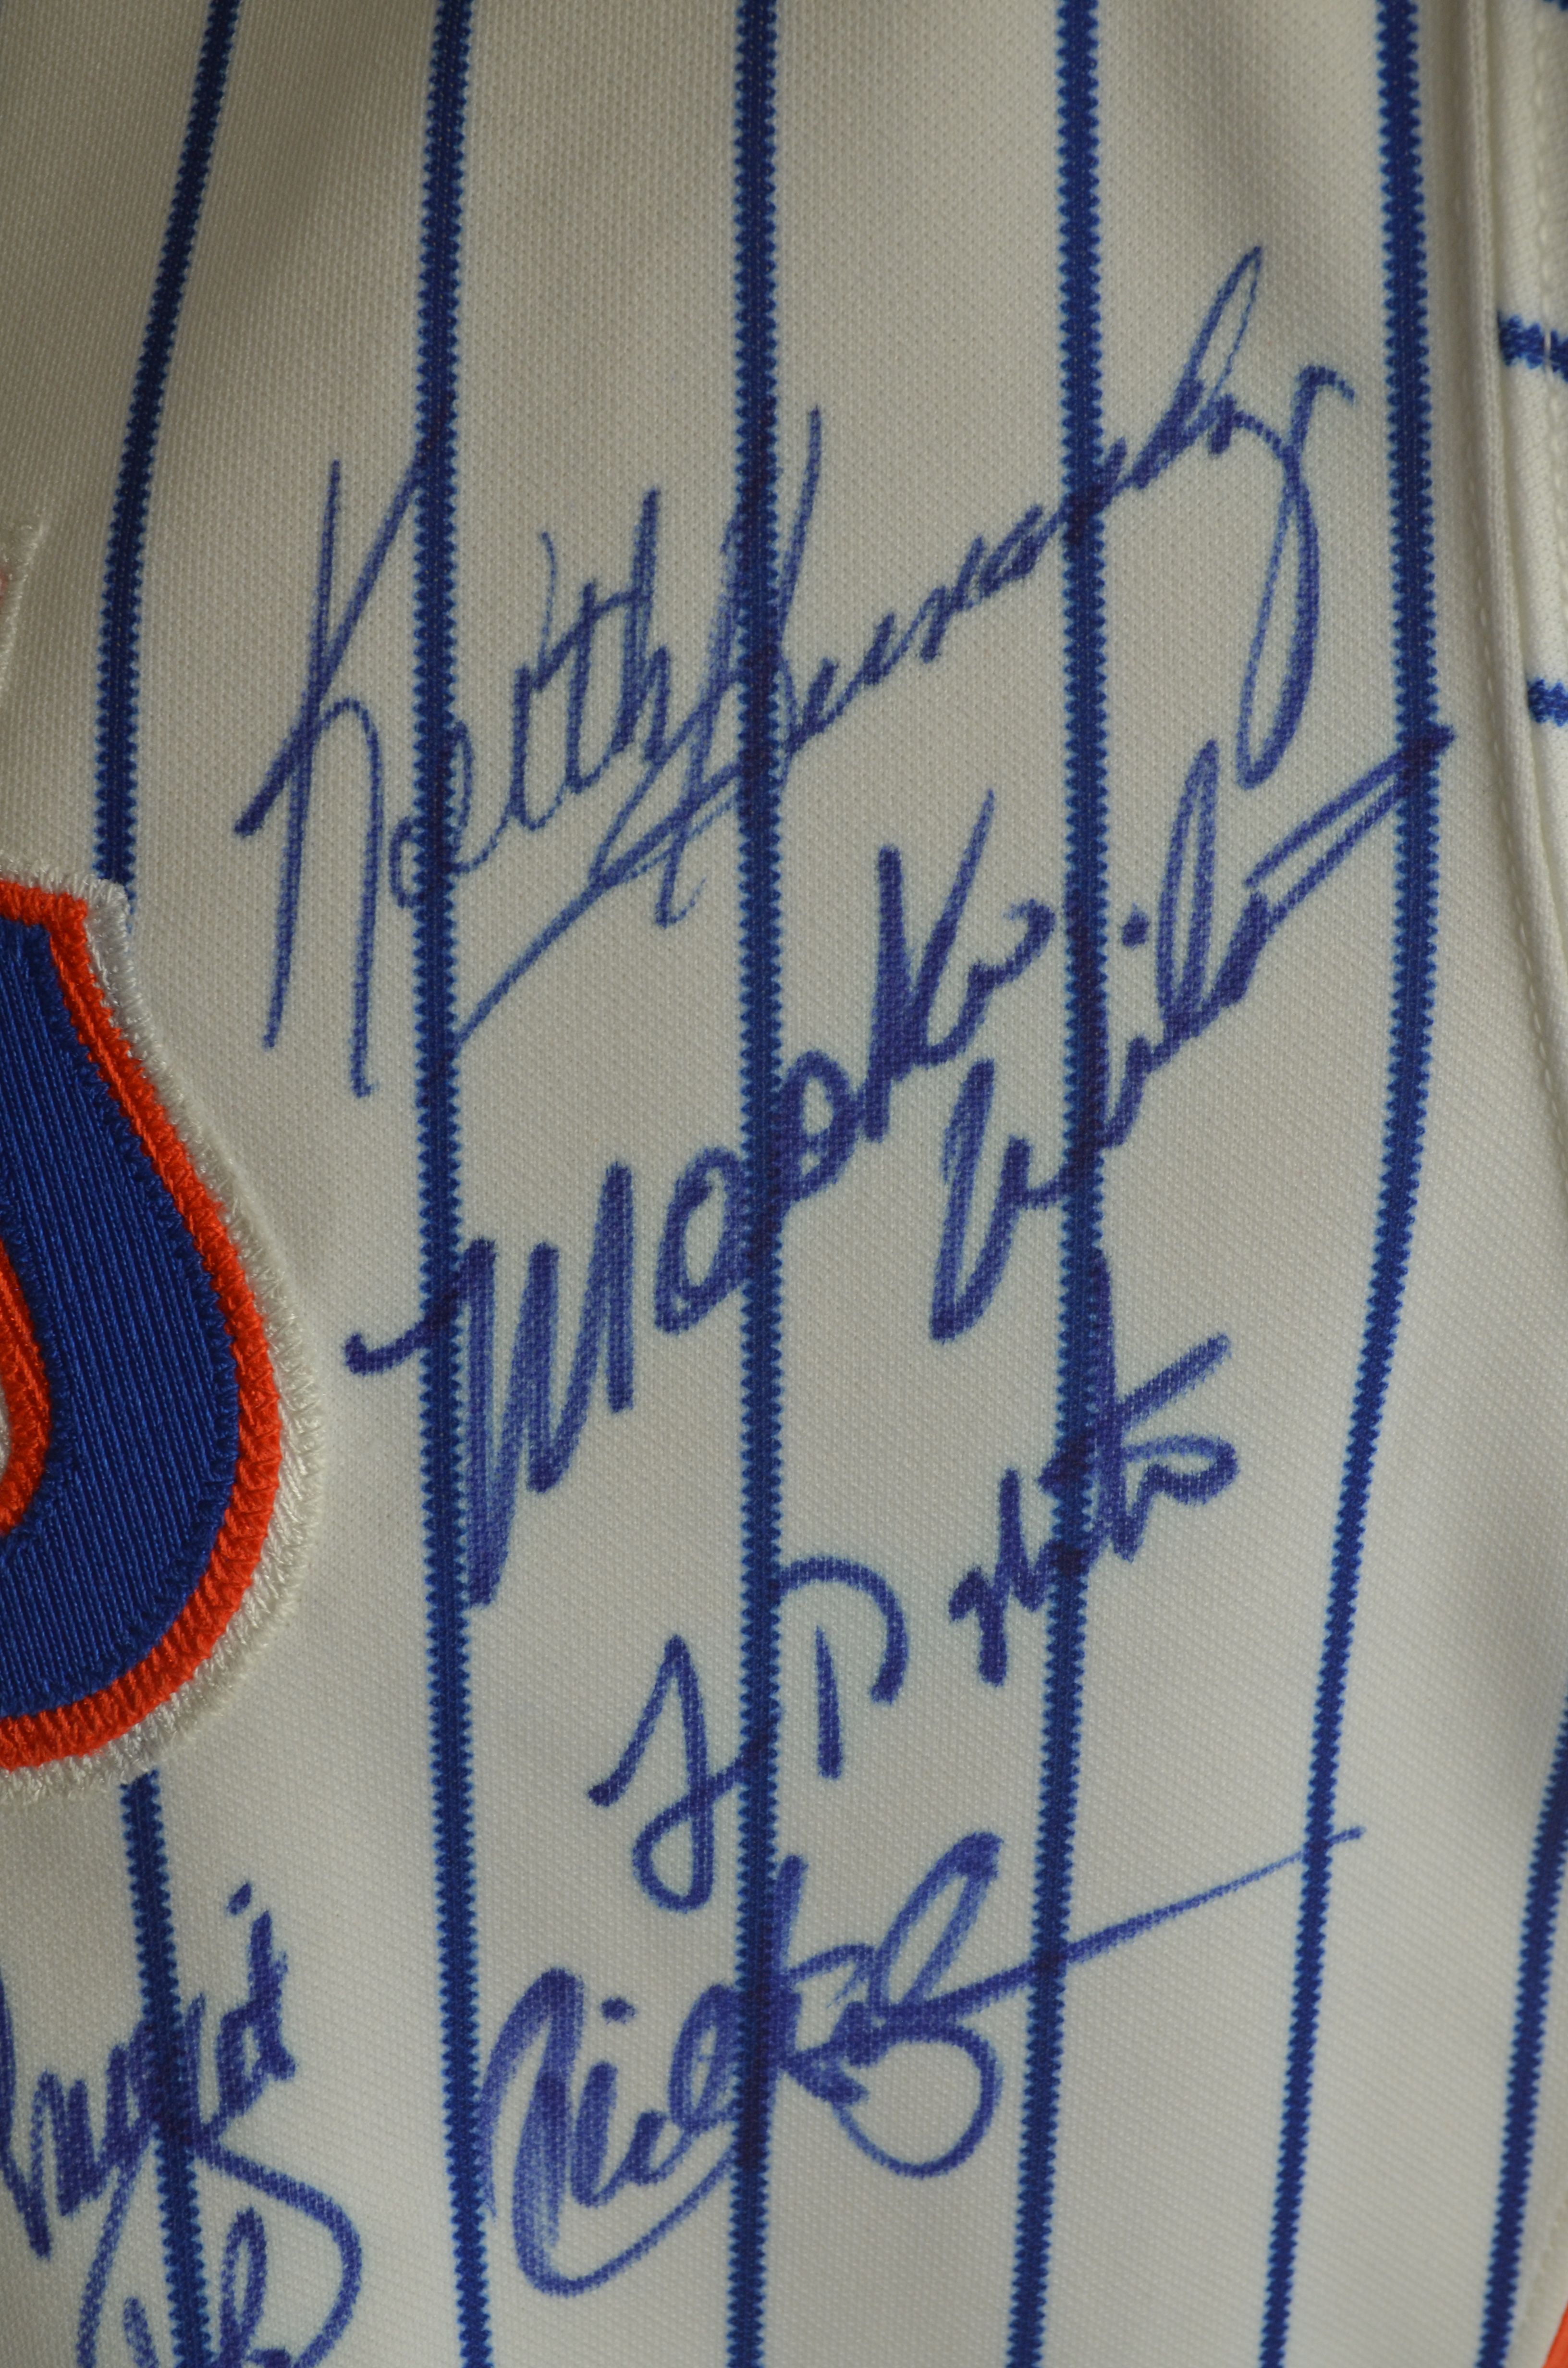 New York Mets Ray Knight Signed Grey Jersey w/86 WS MVP - Schwartz  Authenticated